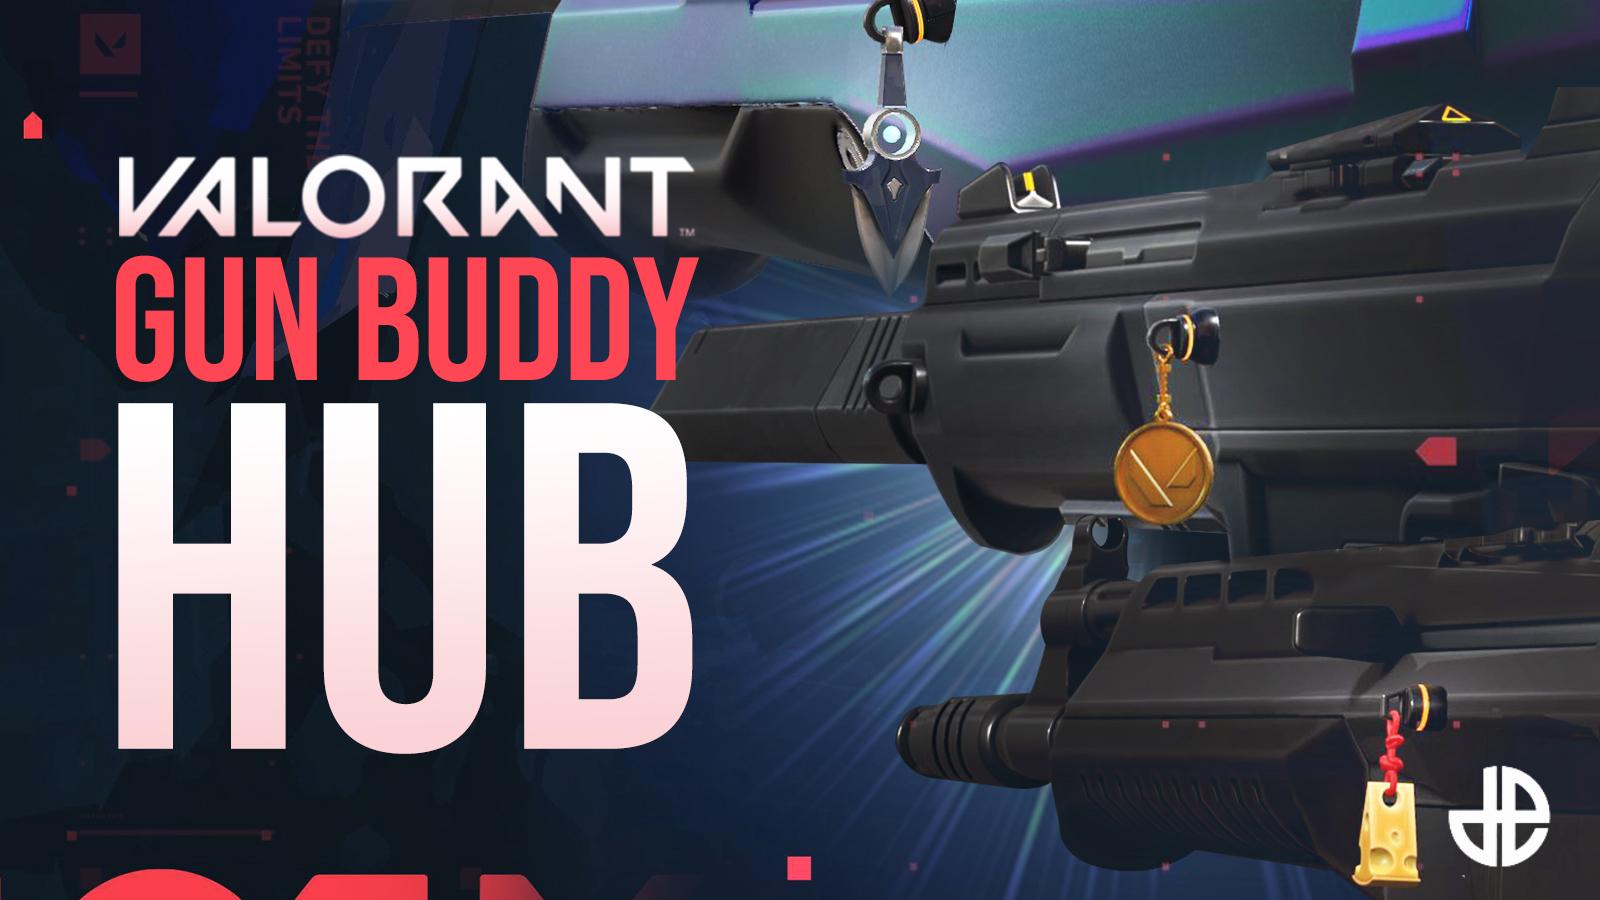 Valorant Twitch Prime Gaming: How to get free Hot Take Gun Buddy